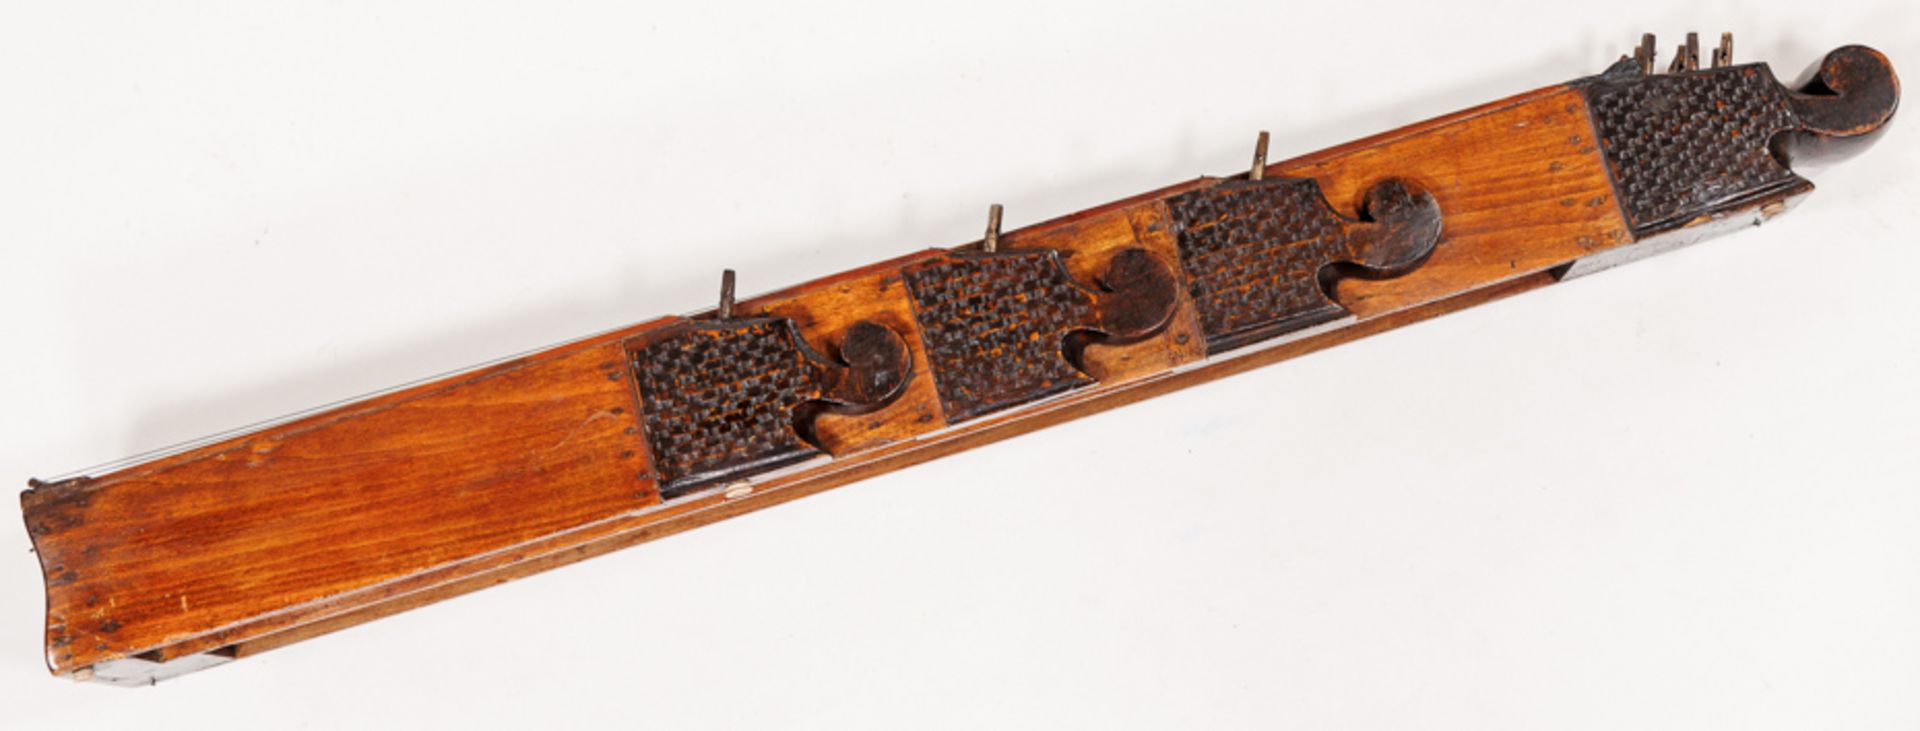 CONVOLUTE DOVECOTE ZITHER AND SMALL-HEADED ZITHER/CITERA, HUNGARY, 19TH/20TH CENTURY - Image 6 of 9